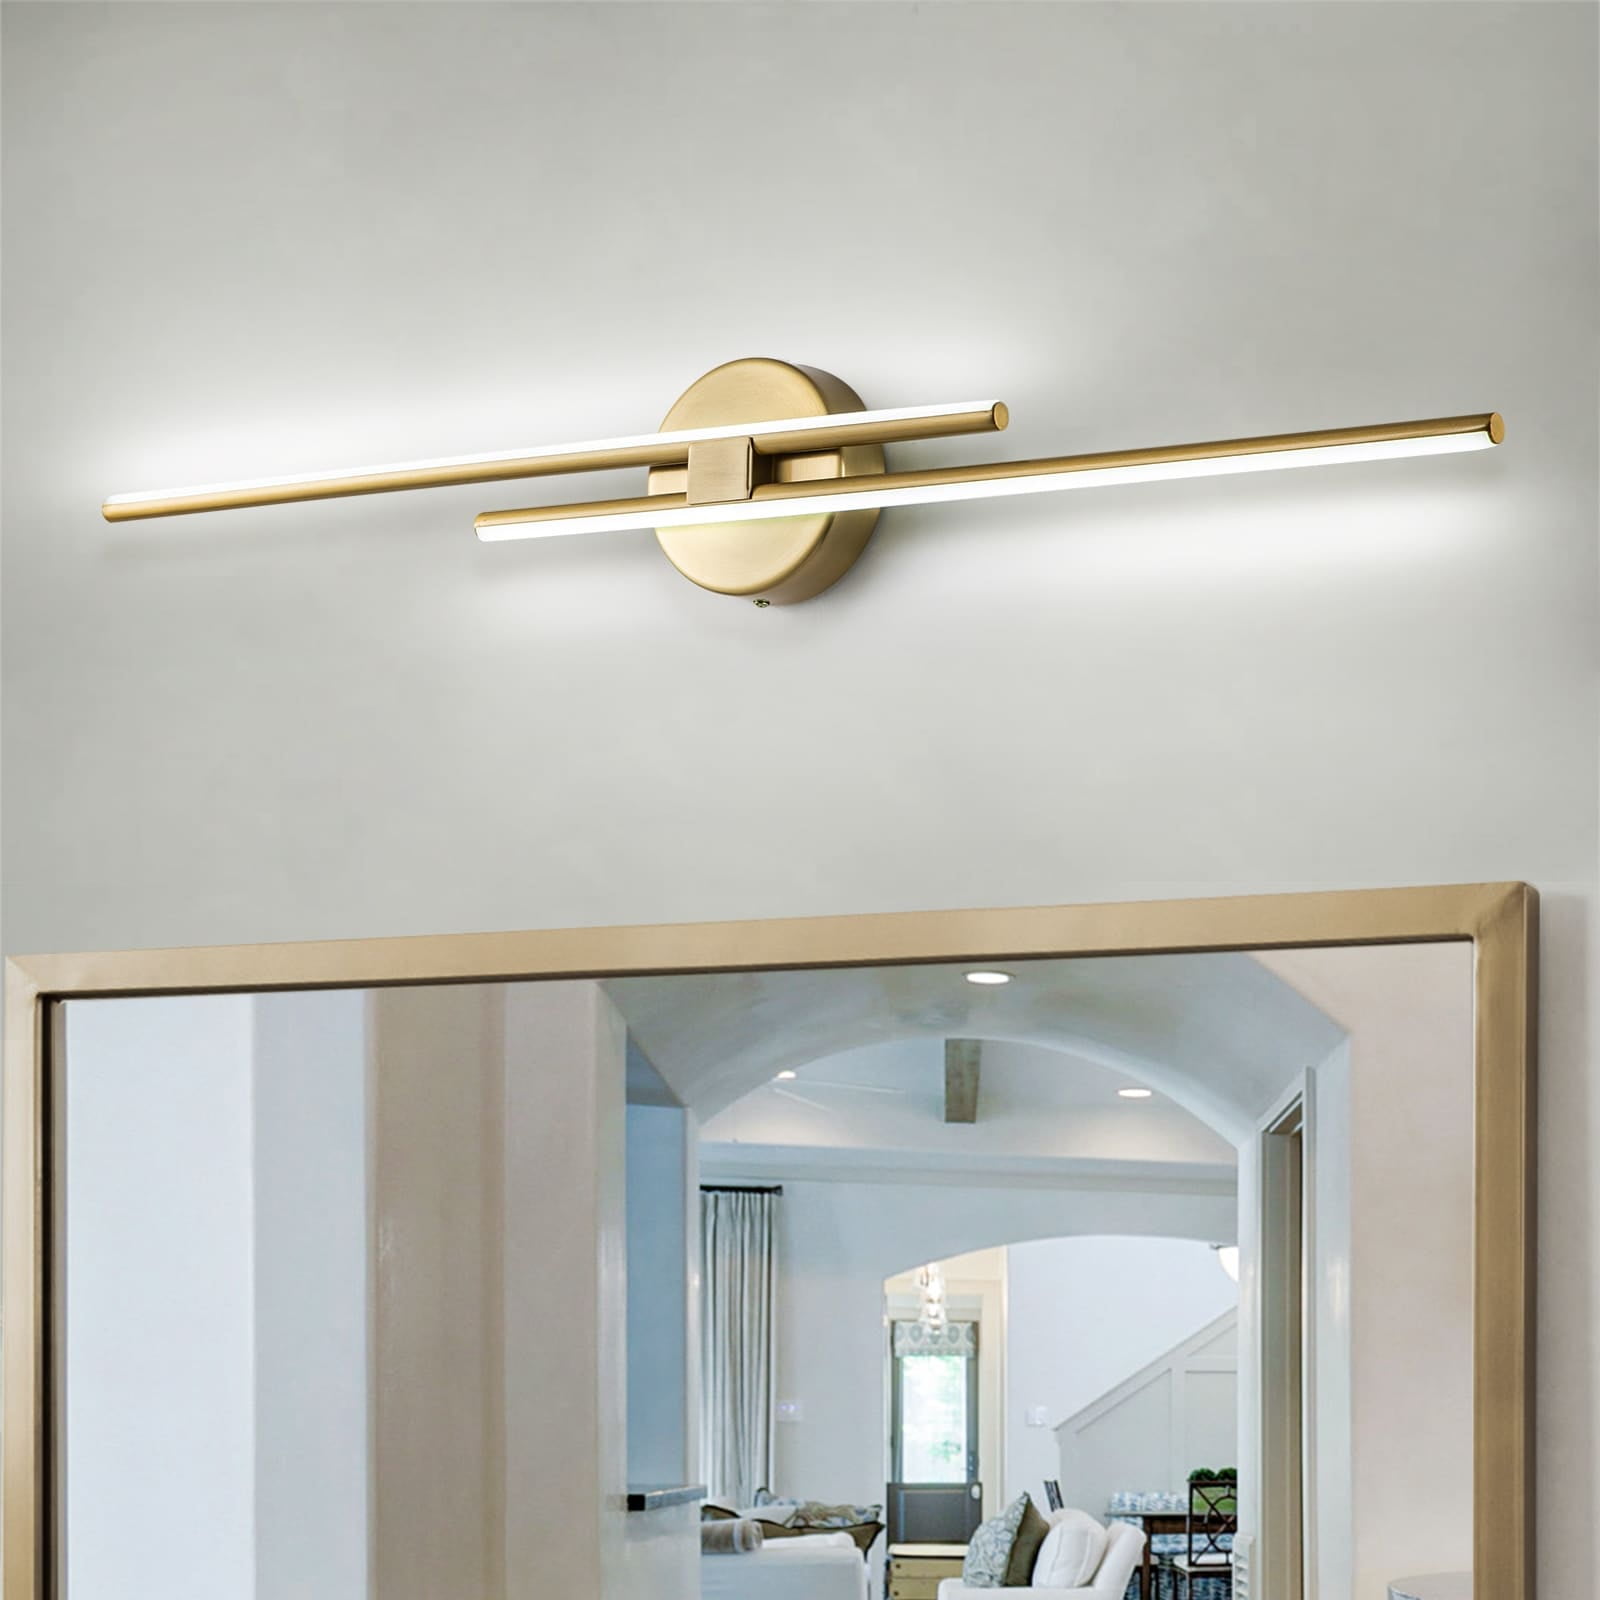 OYIPRO Minimalist Linear LED Vanity Light Dimmable Metal Wall